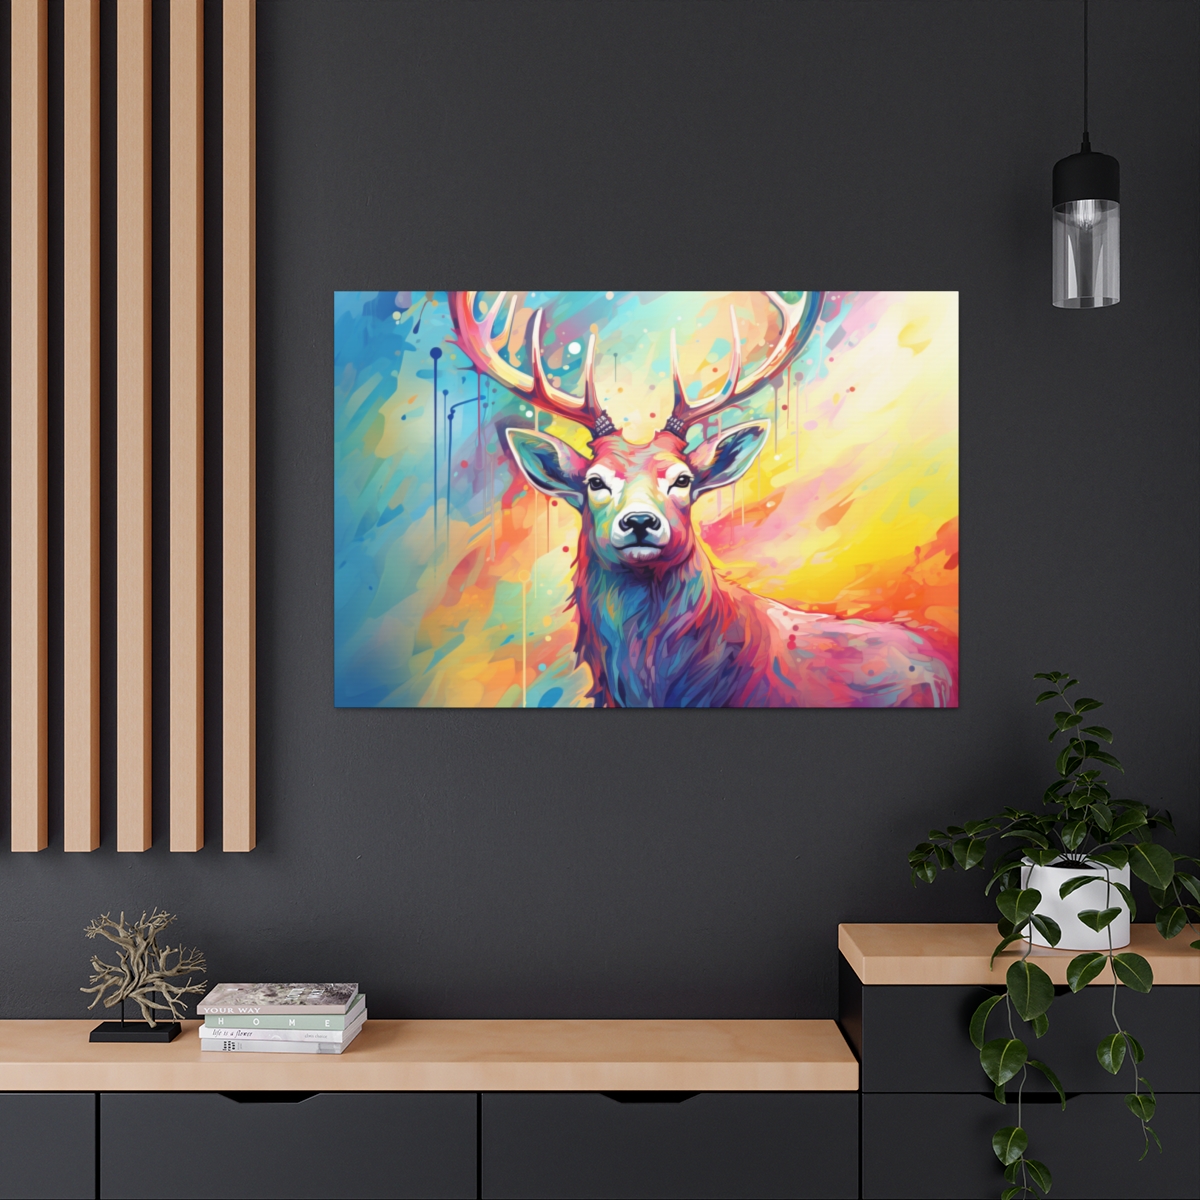 Ethereal Art Canvas Print: Astral Antlers